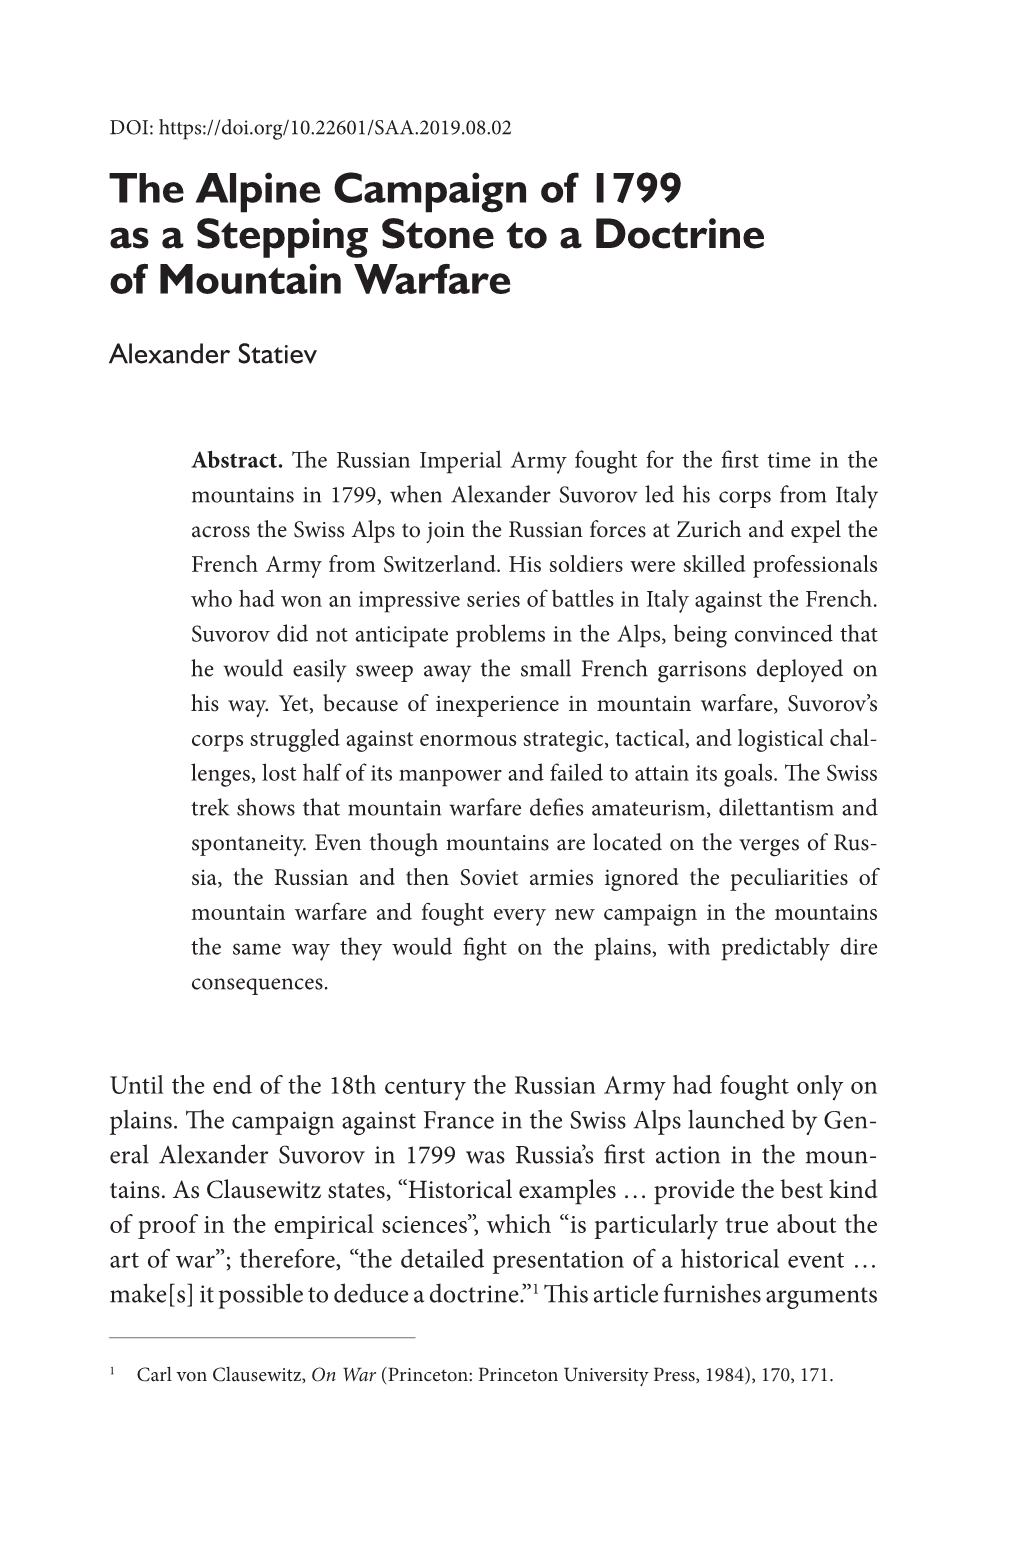 The Alpine Campaign of 1799 As a Stepping Stone to a Doctrine of Mountain Warfare